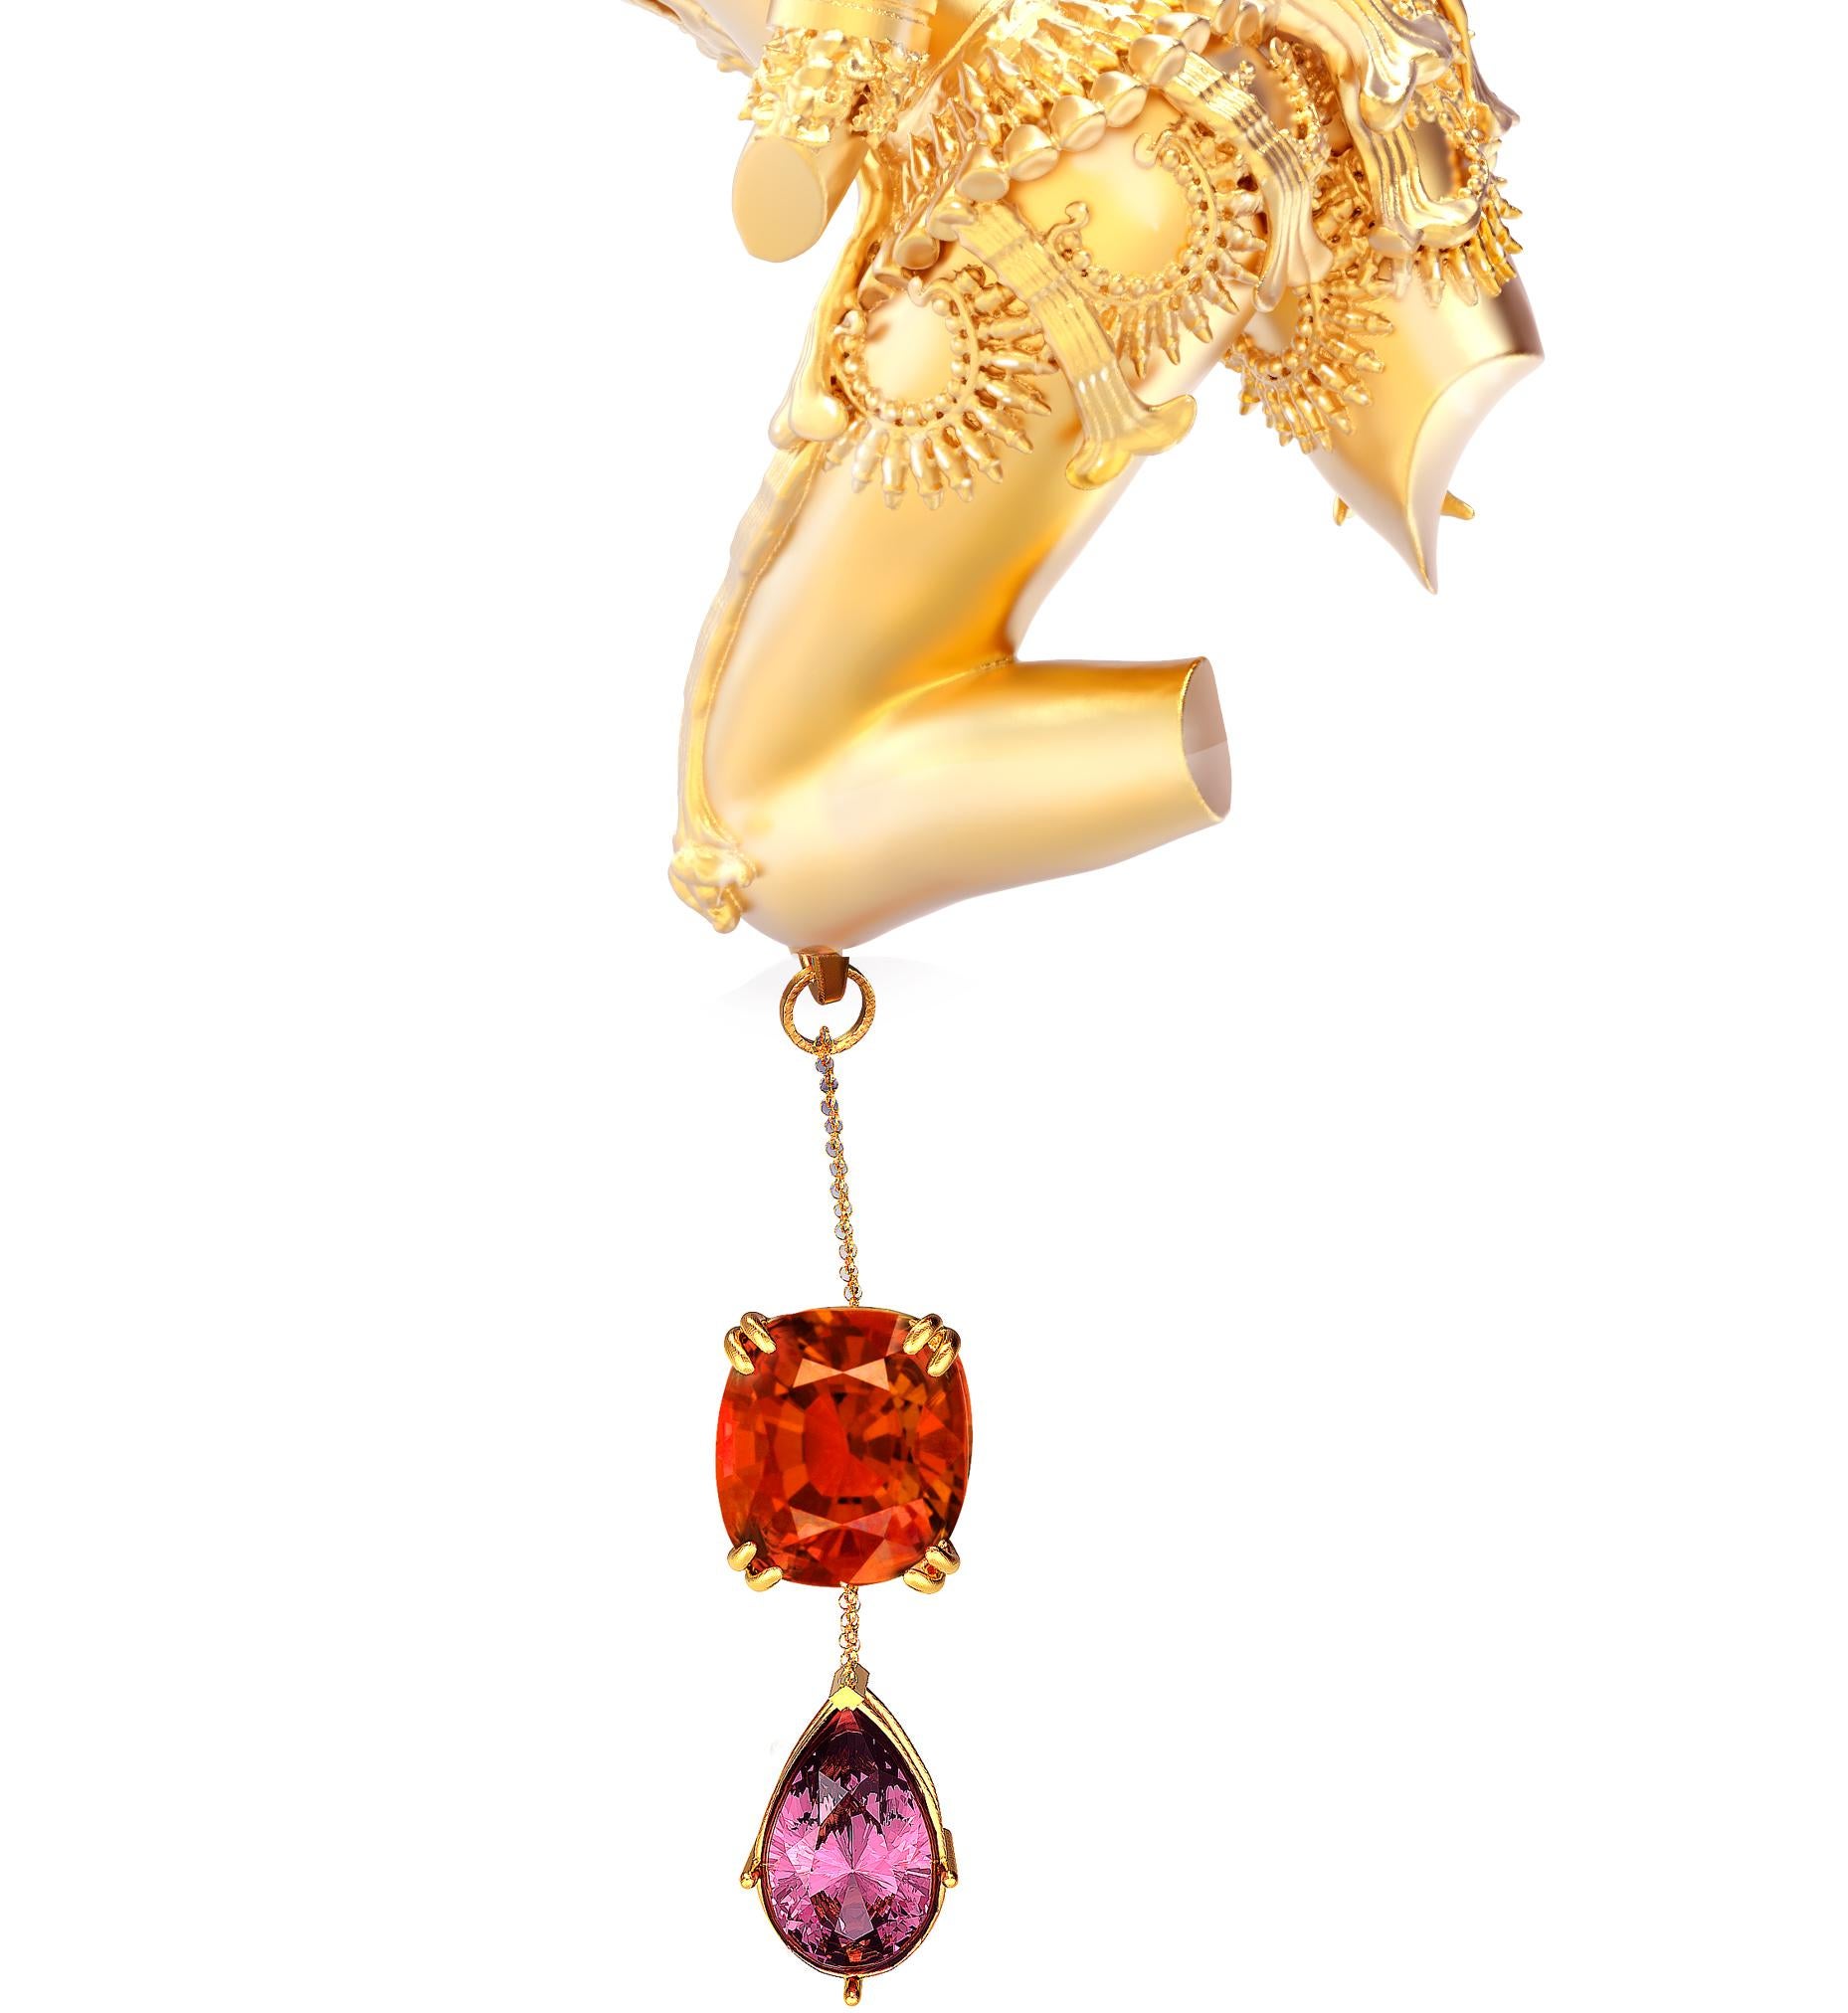 This Celestial Dancer Devata Sculptural pendant necklace is made of 18 karat yellow gold with untreated unheated (PL tested) natural cushion cut vivid red spinel, 3,07 carats, 9,27x7,72x5,14 mm, GRS certified (Swiss lab), from Burma (Myanmar), pear